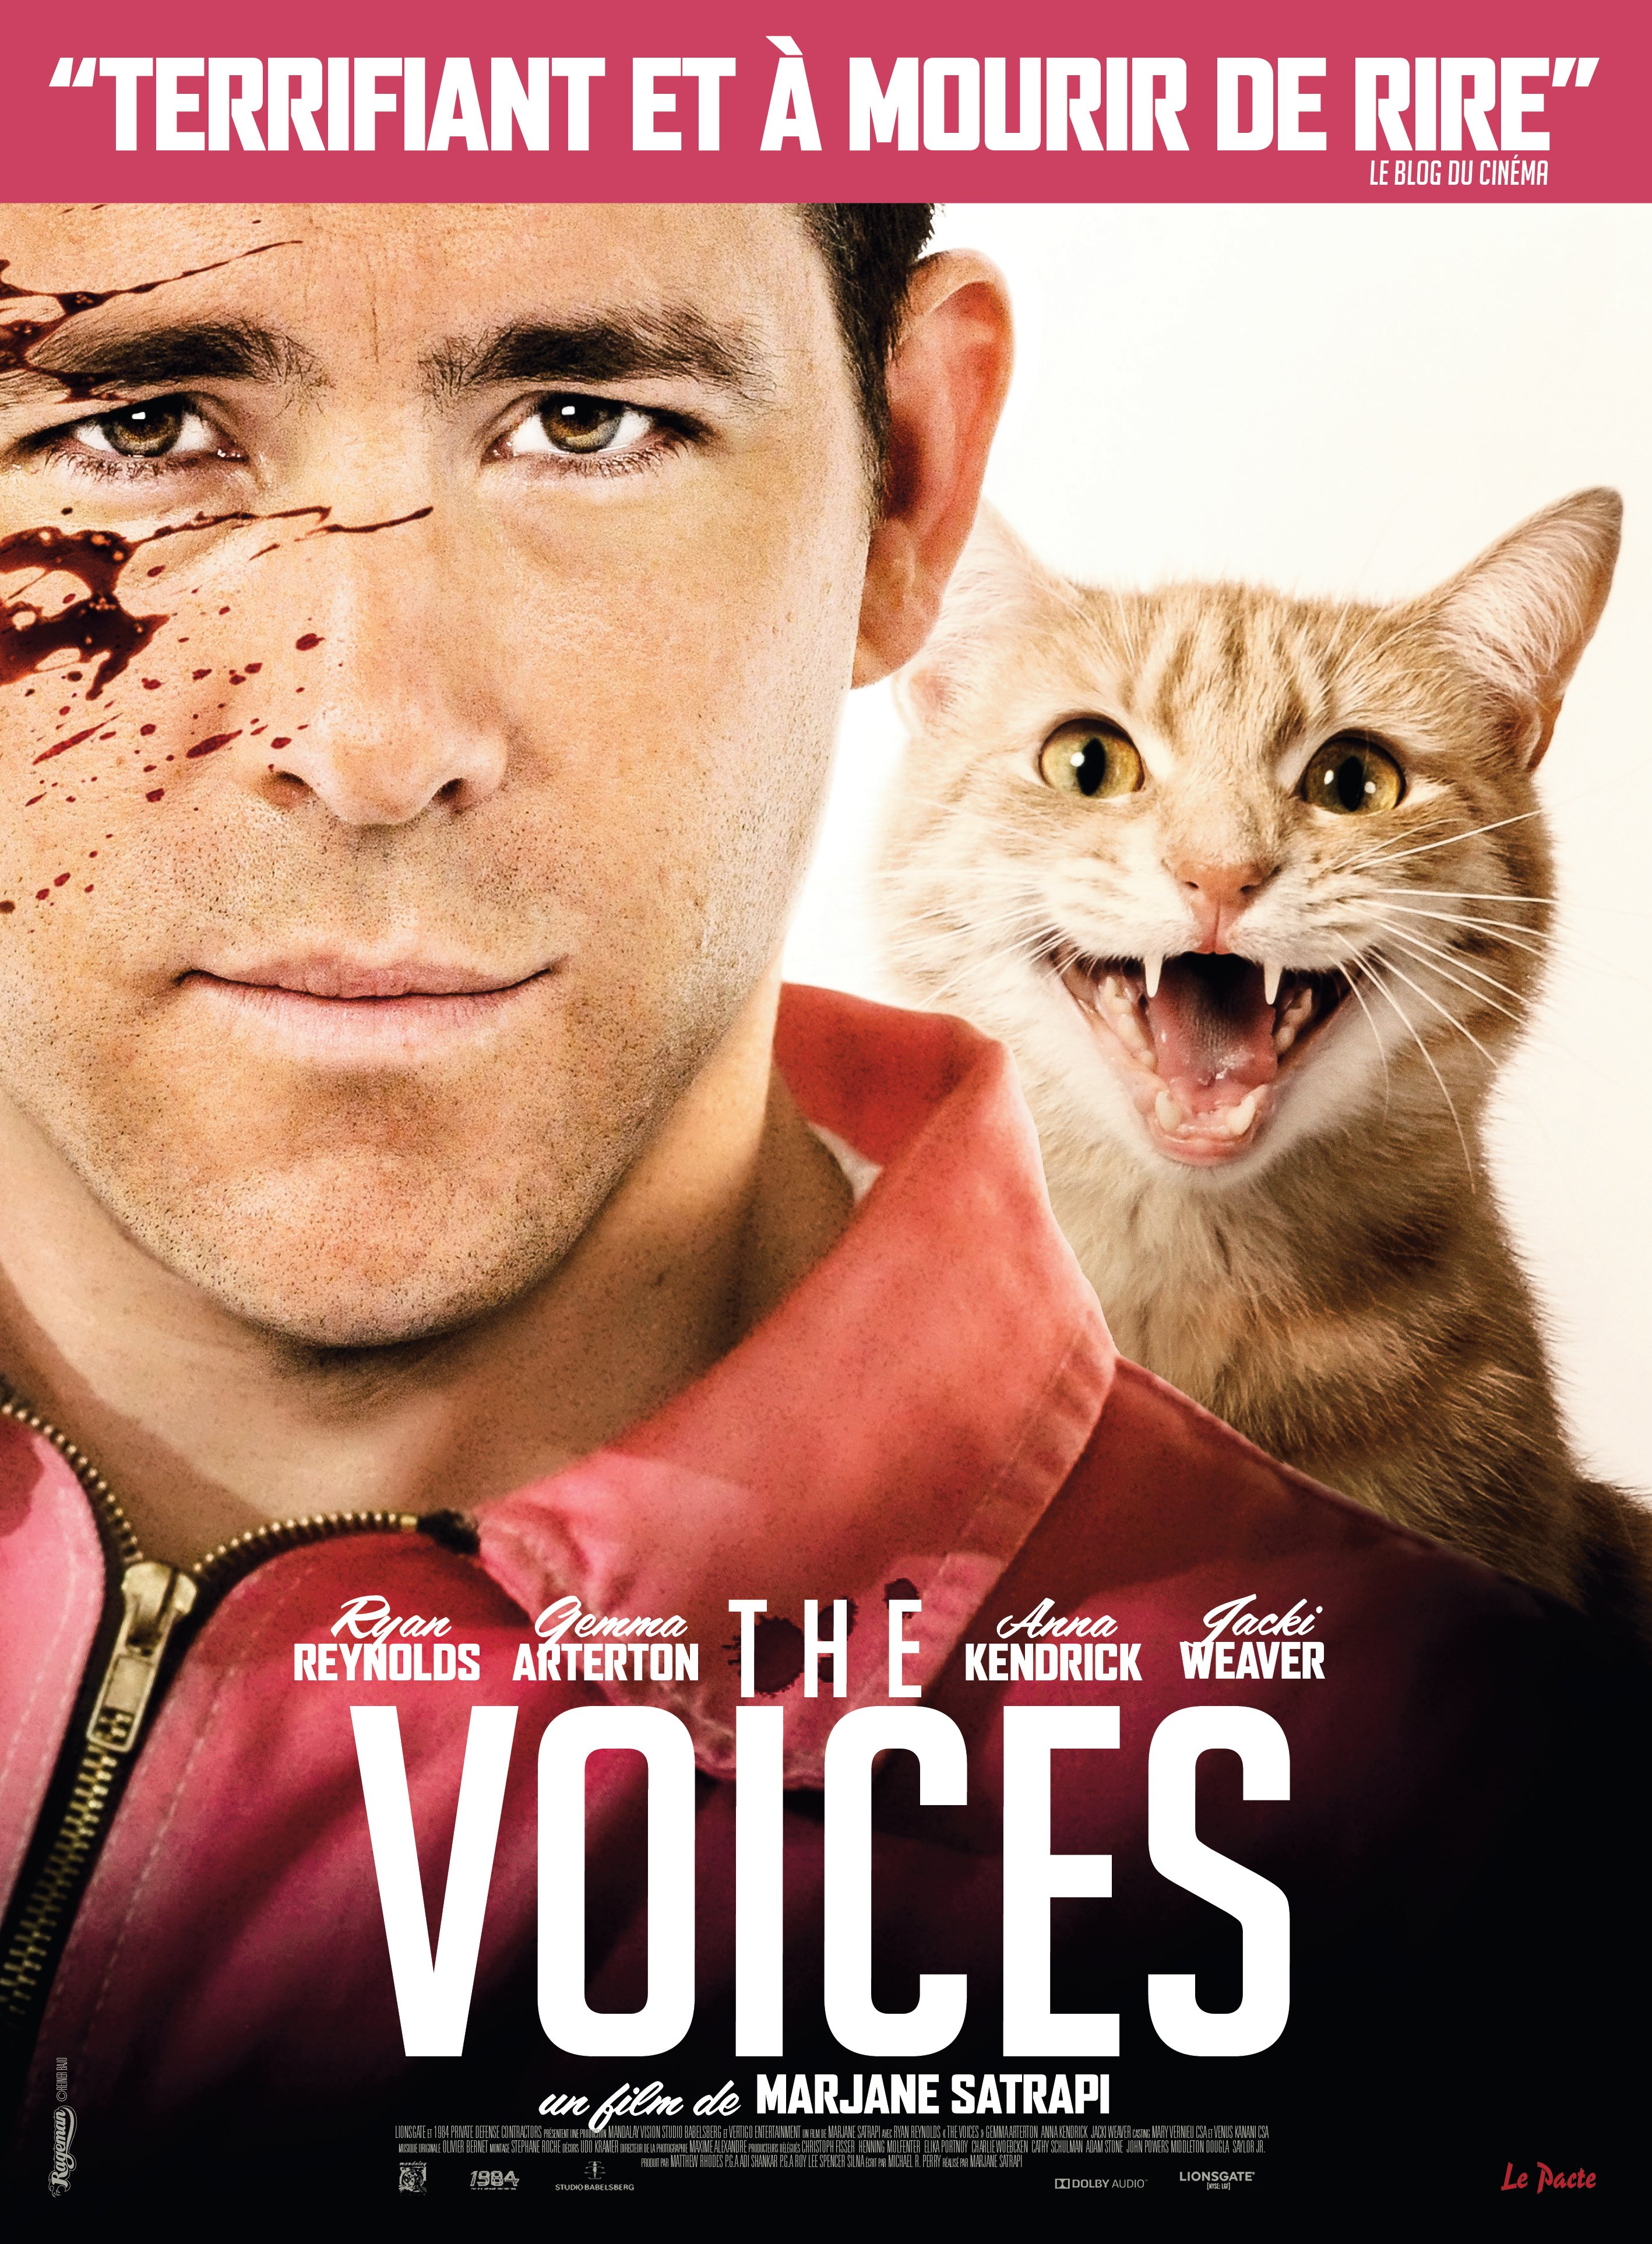 the-voices-film-2015-affiche-france.jpg